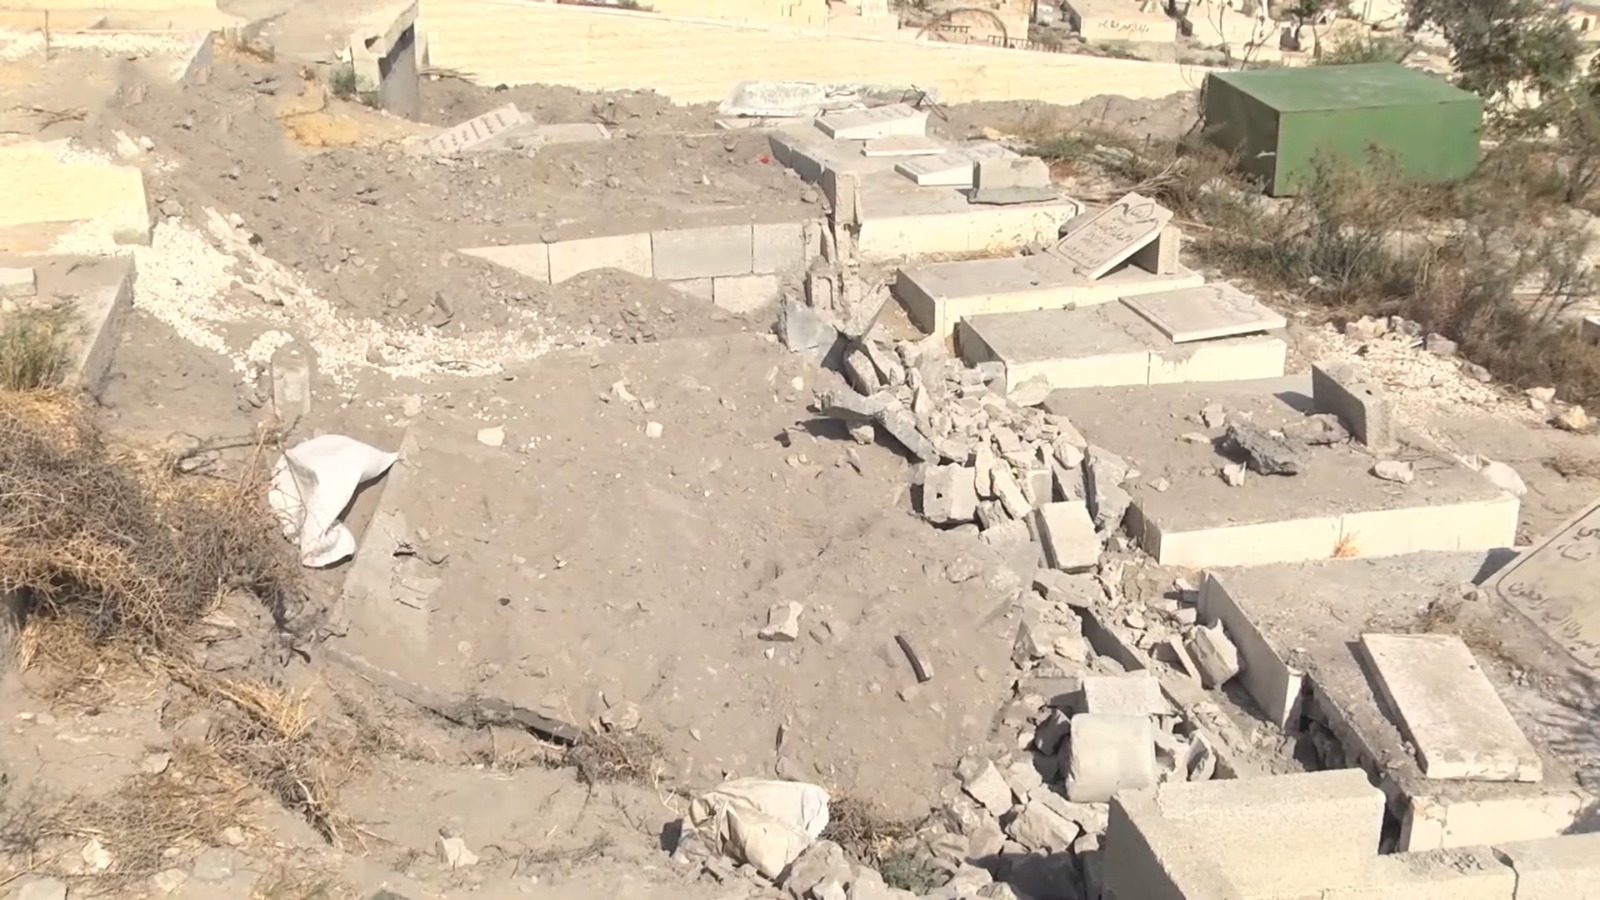 A new crime of "Israel": the demolition of the Yusufiya cemetery in Jerusalem